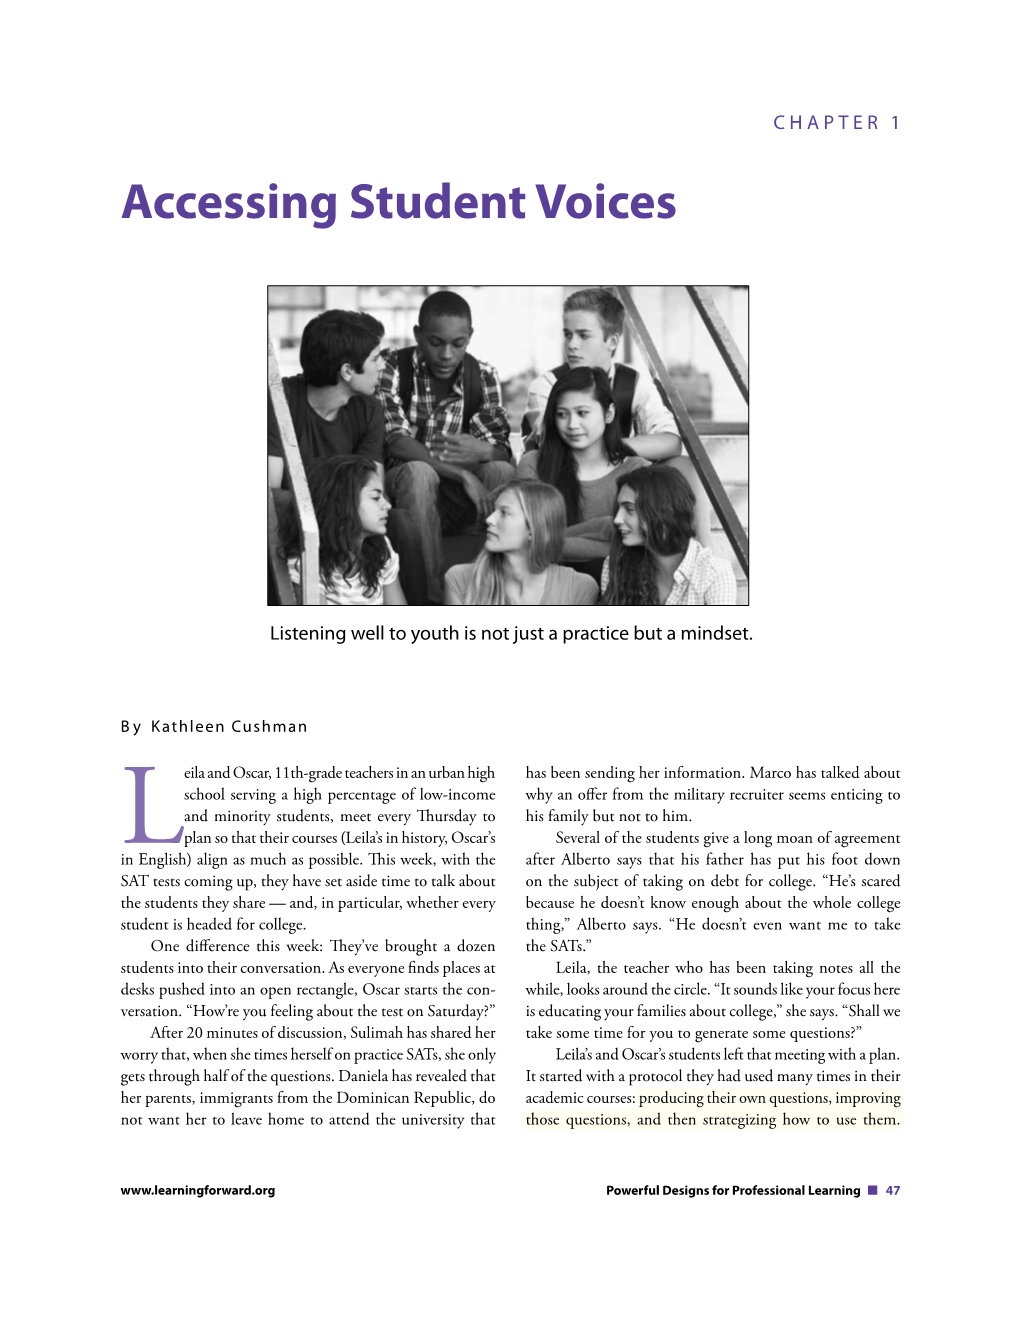 Accessing Student Voices